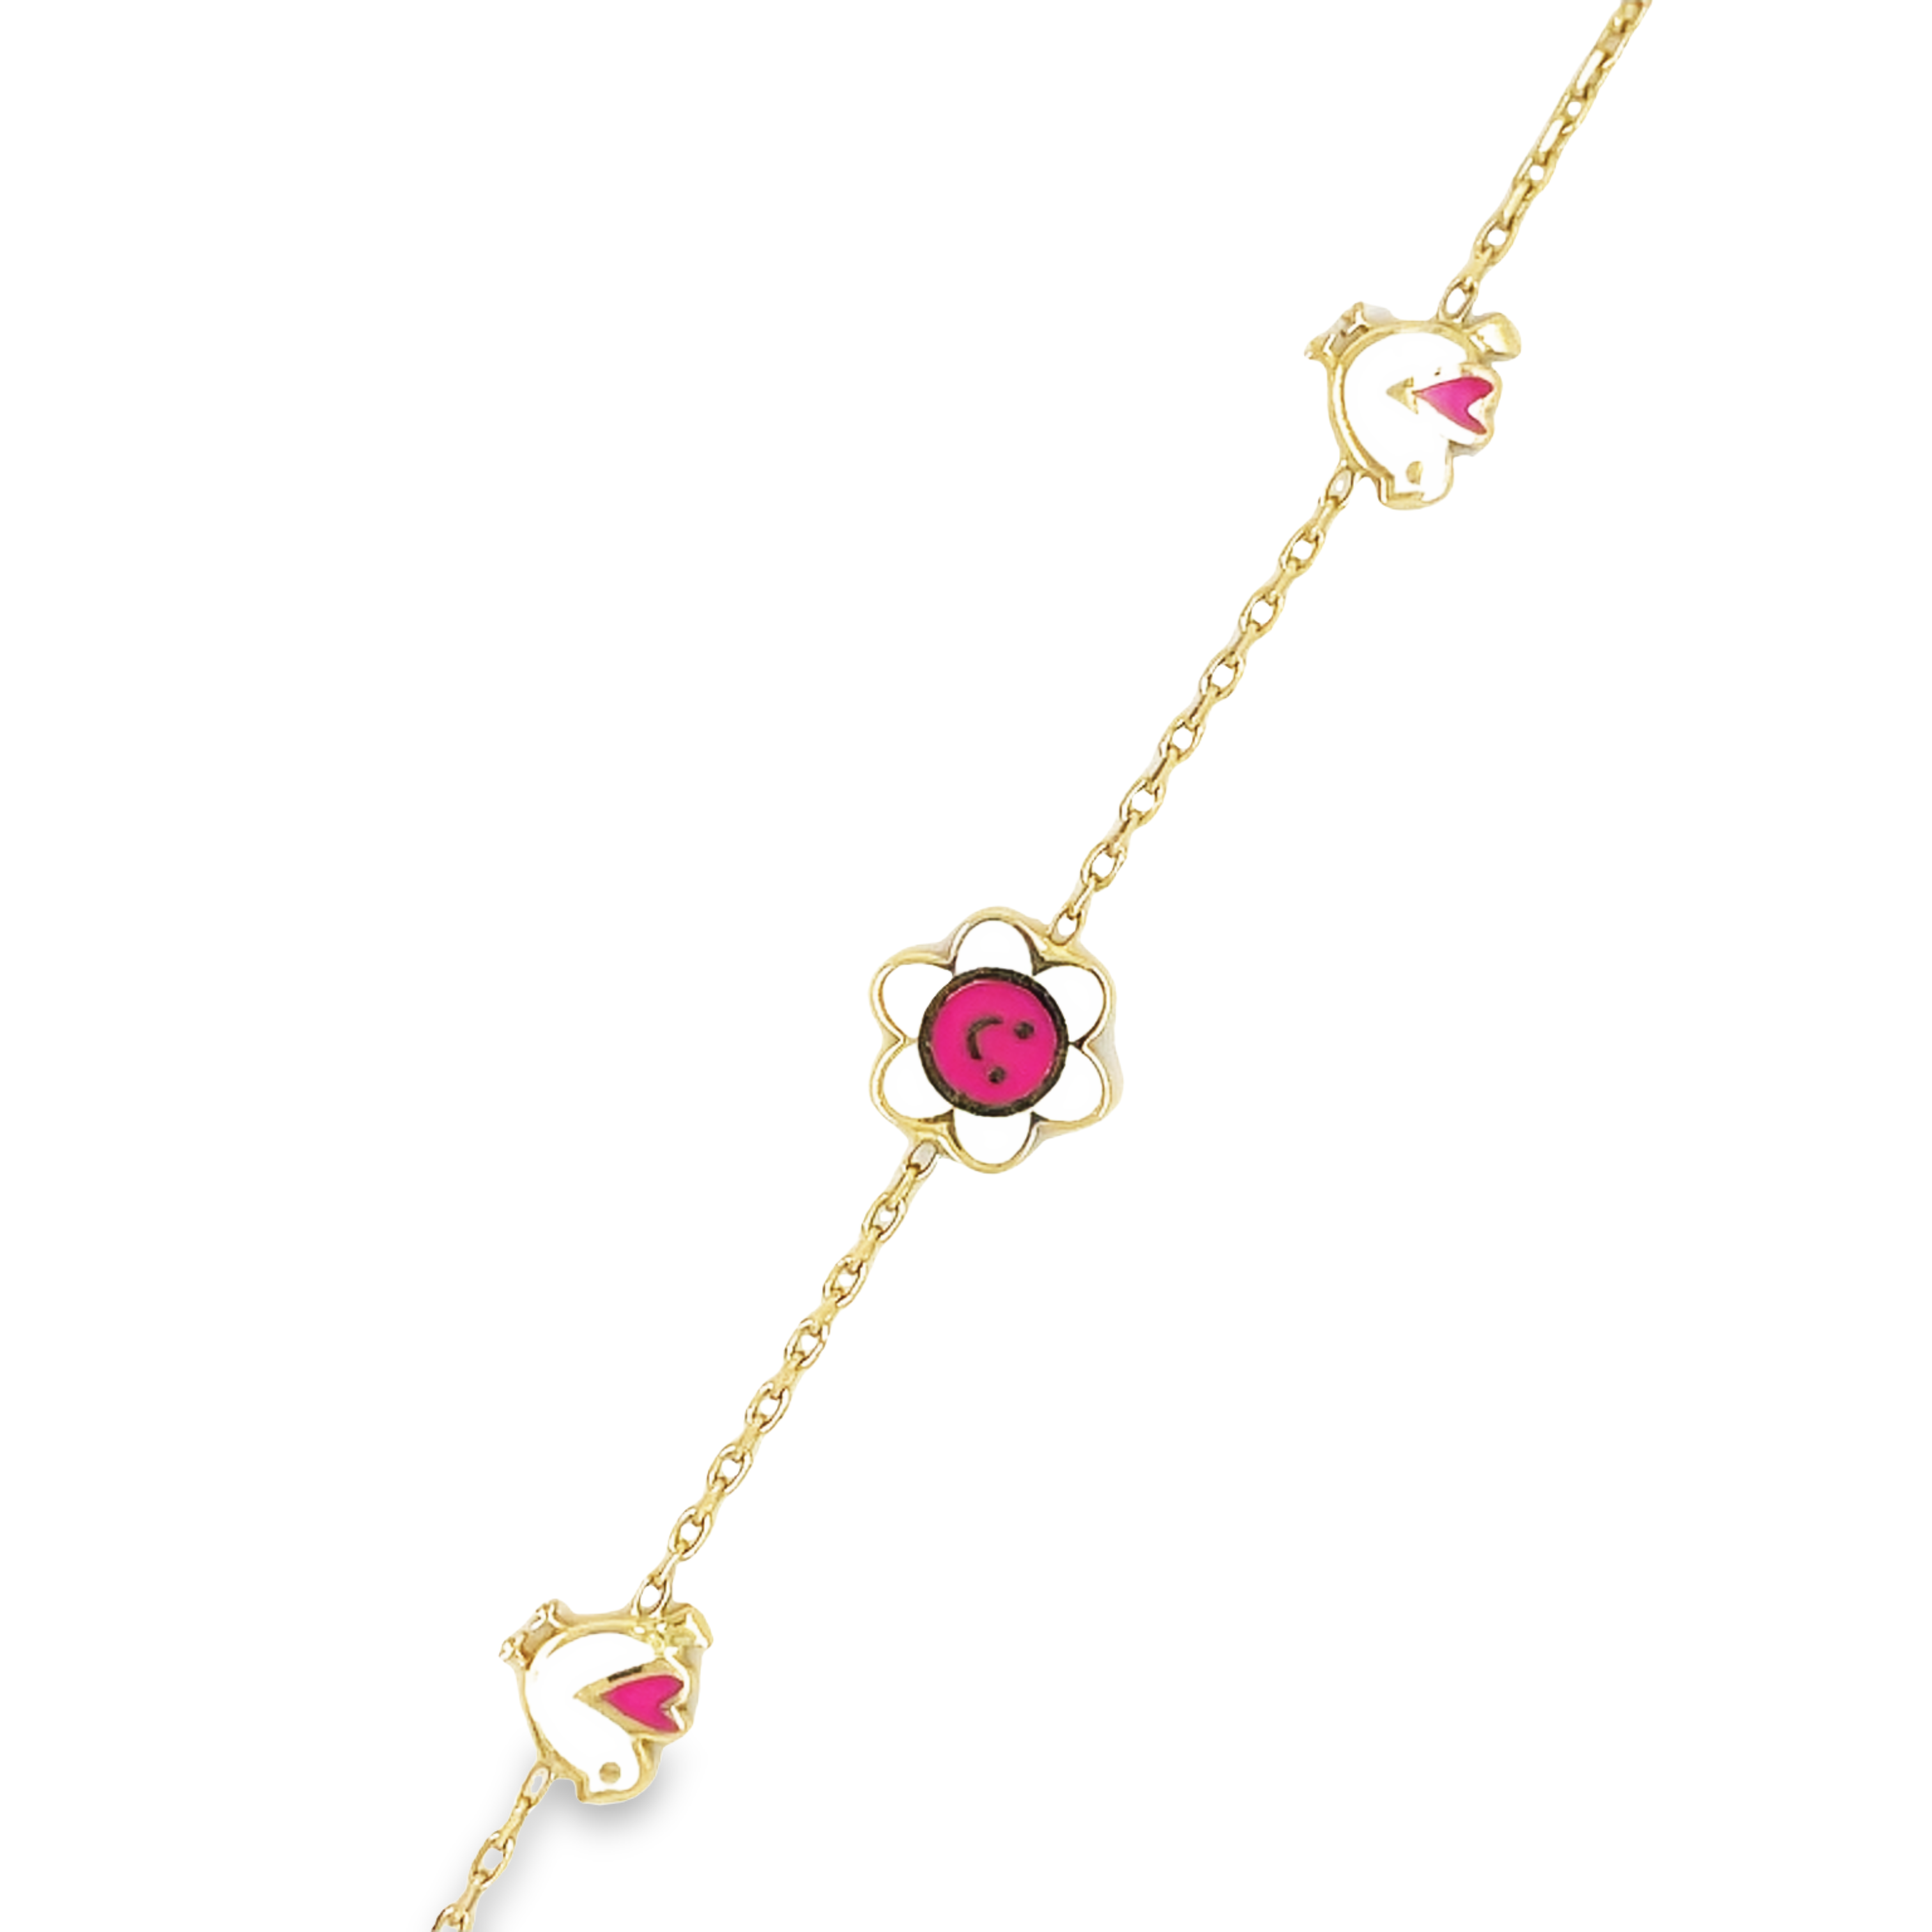 This classic Children's Bracelet is crafted with 14k Yellow Gold and decorated with a flower and birdie charms. The perfect accessory to capture your little one's personality, it's sure to make a lasting impression.